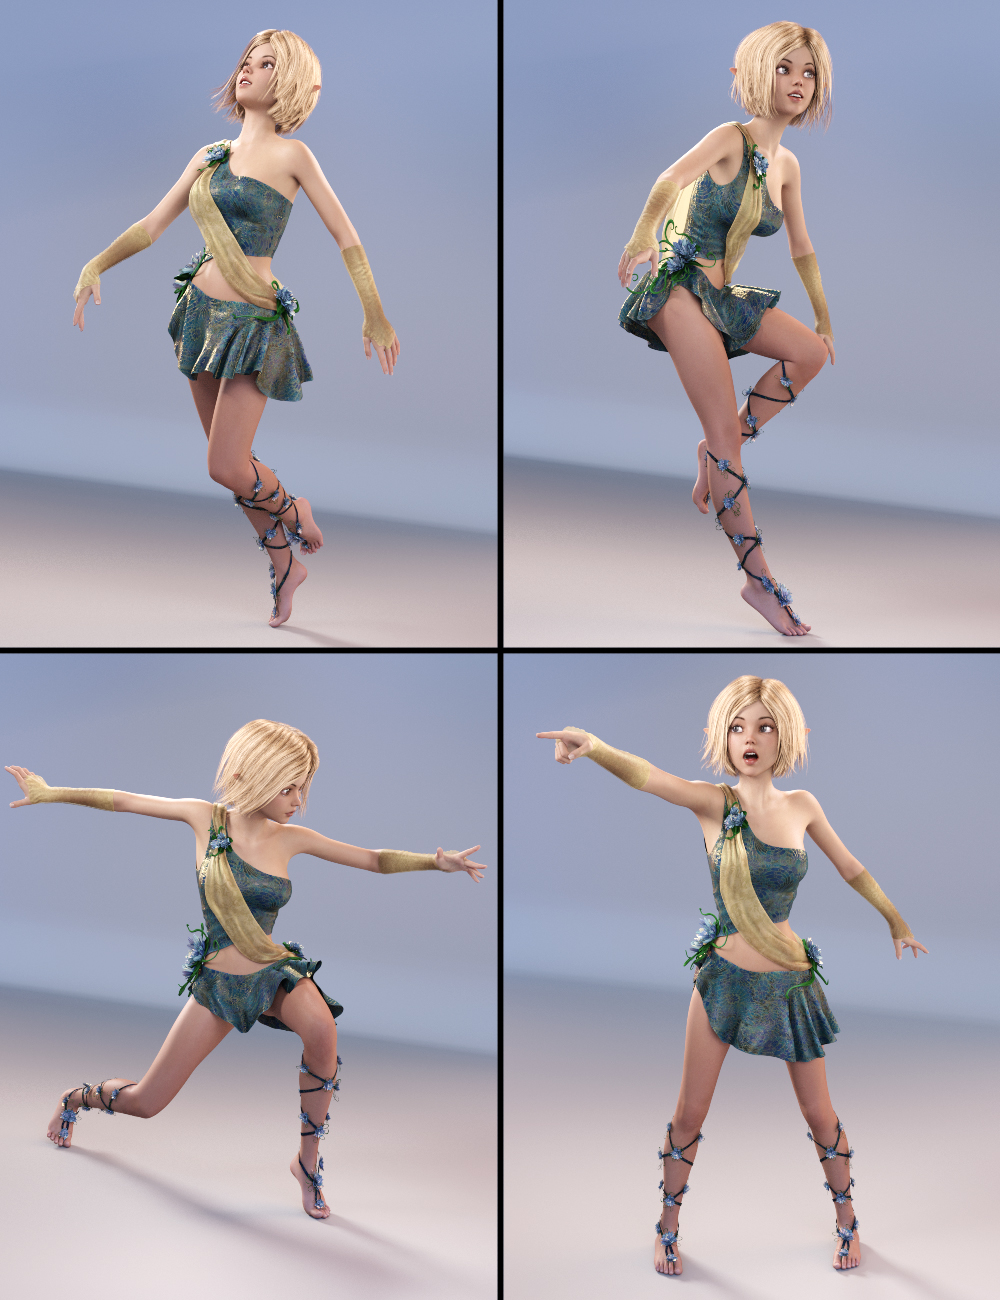 Striking Poses for Mika 7 and Genesis 3 Female by: Diane, 3D Models by Daz 3D